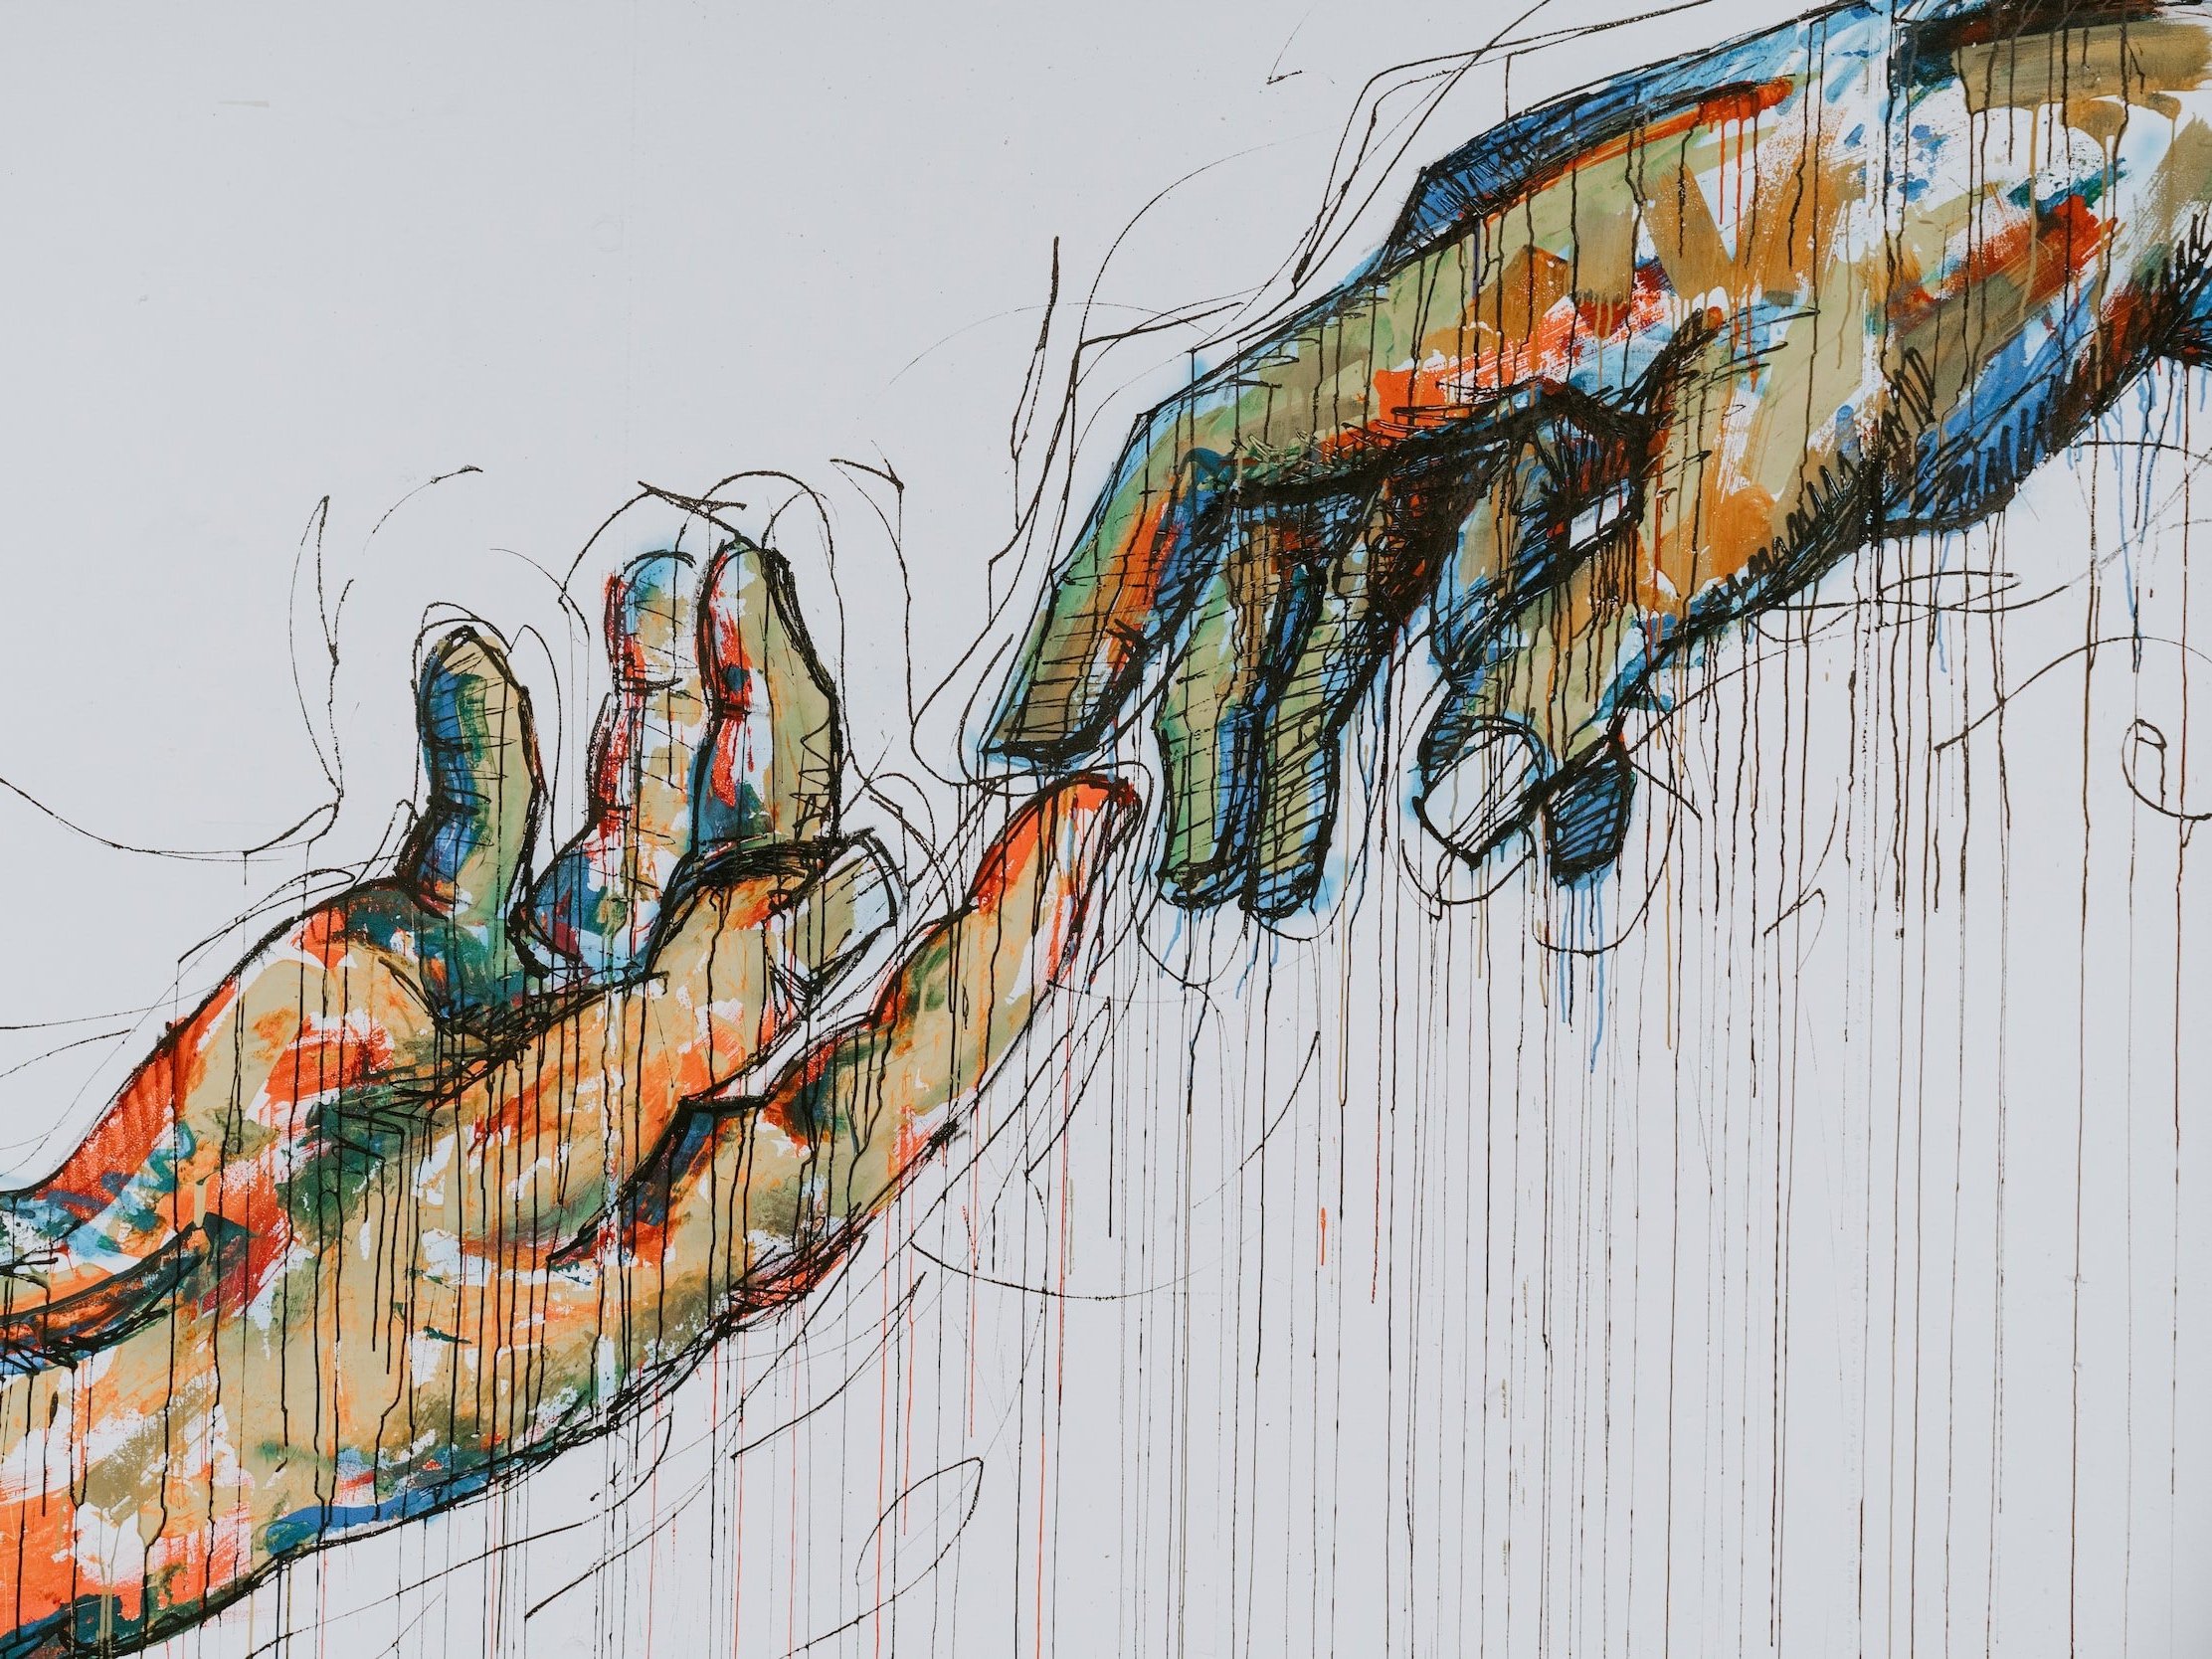 Two drawn and painted hands extend toward one another.